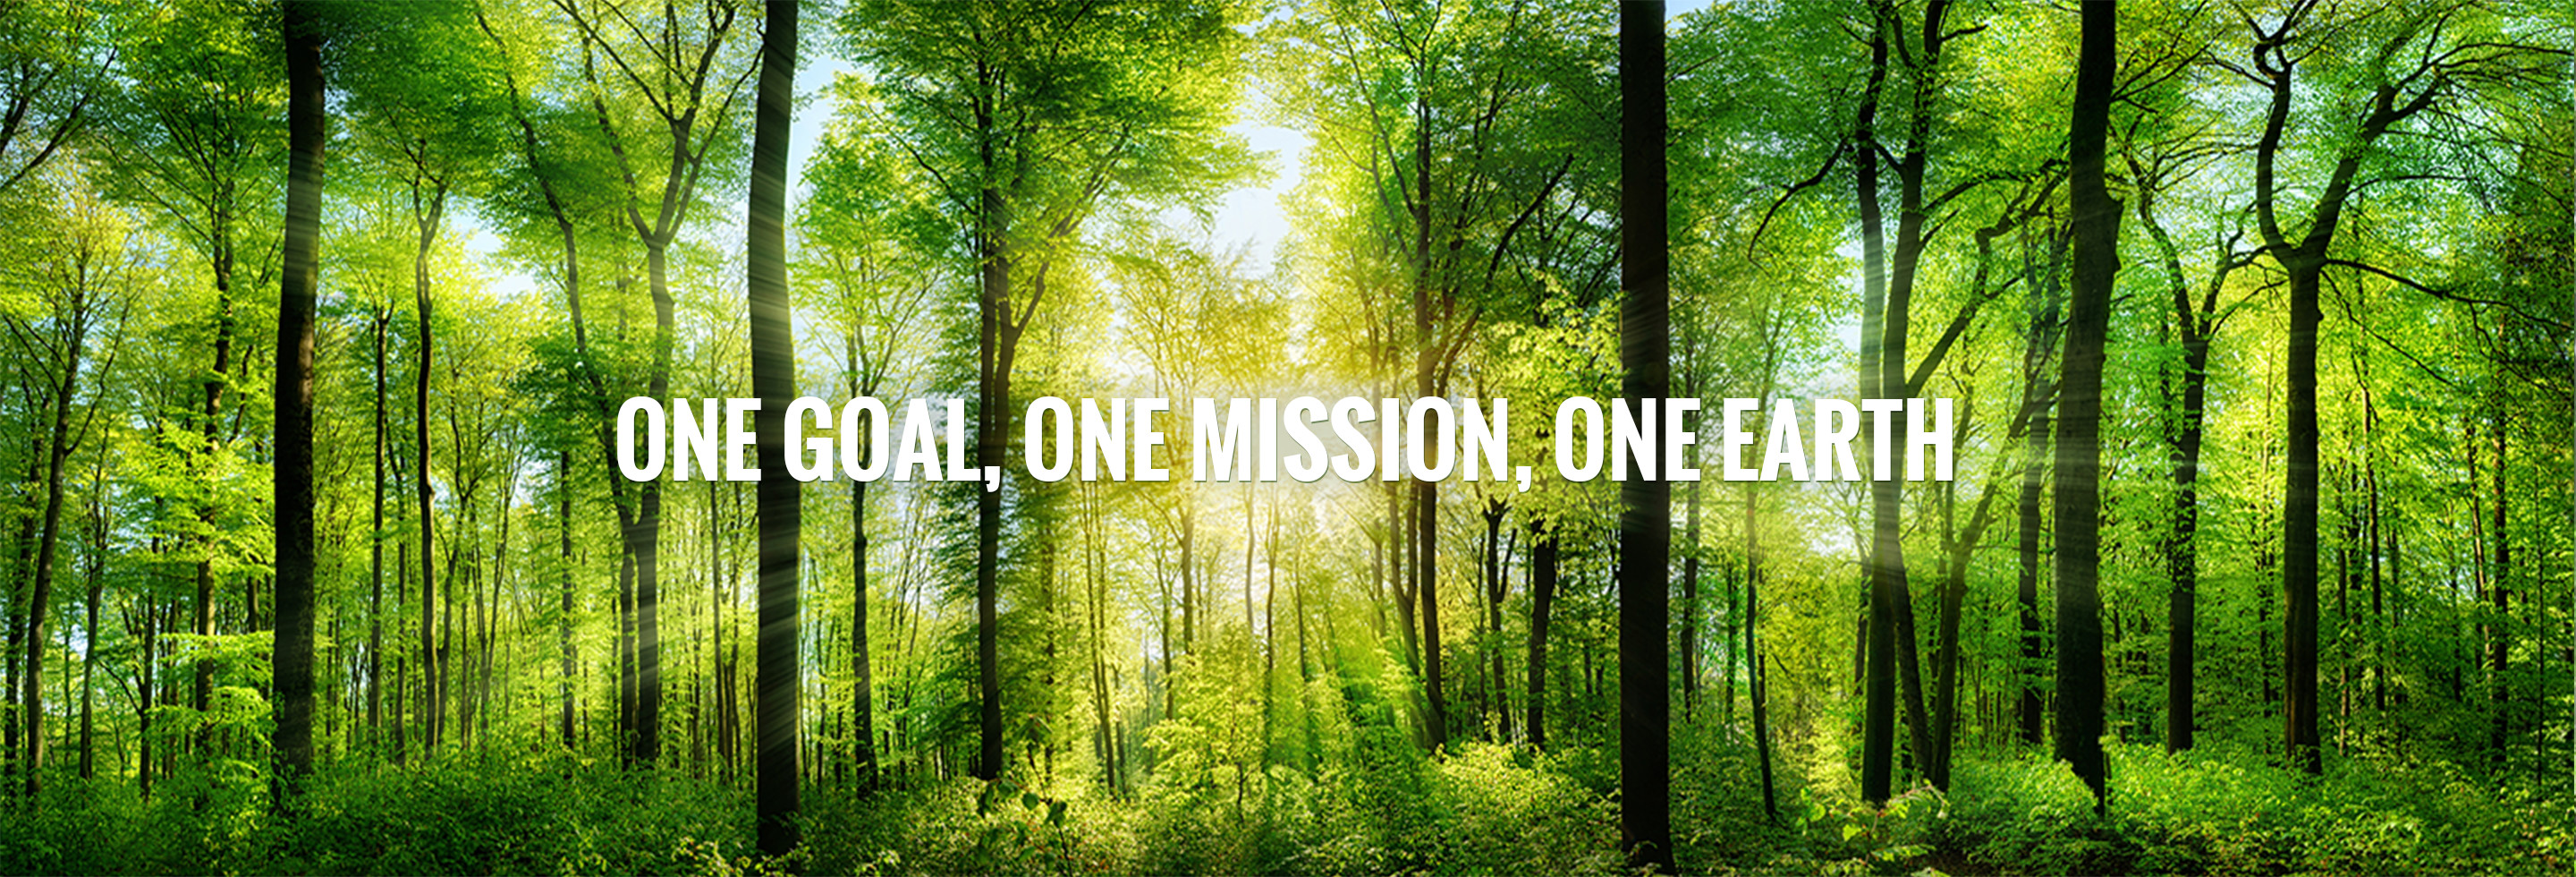 ONE GOAL, ONE MISSION,  ONE EARTH